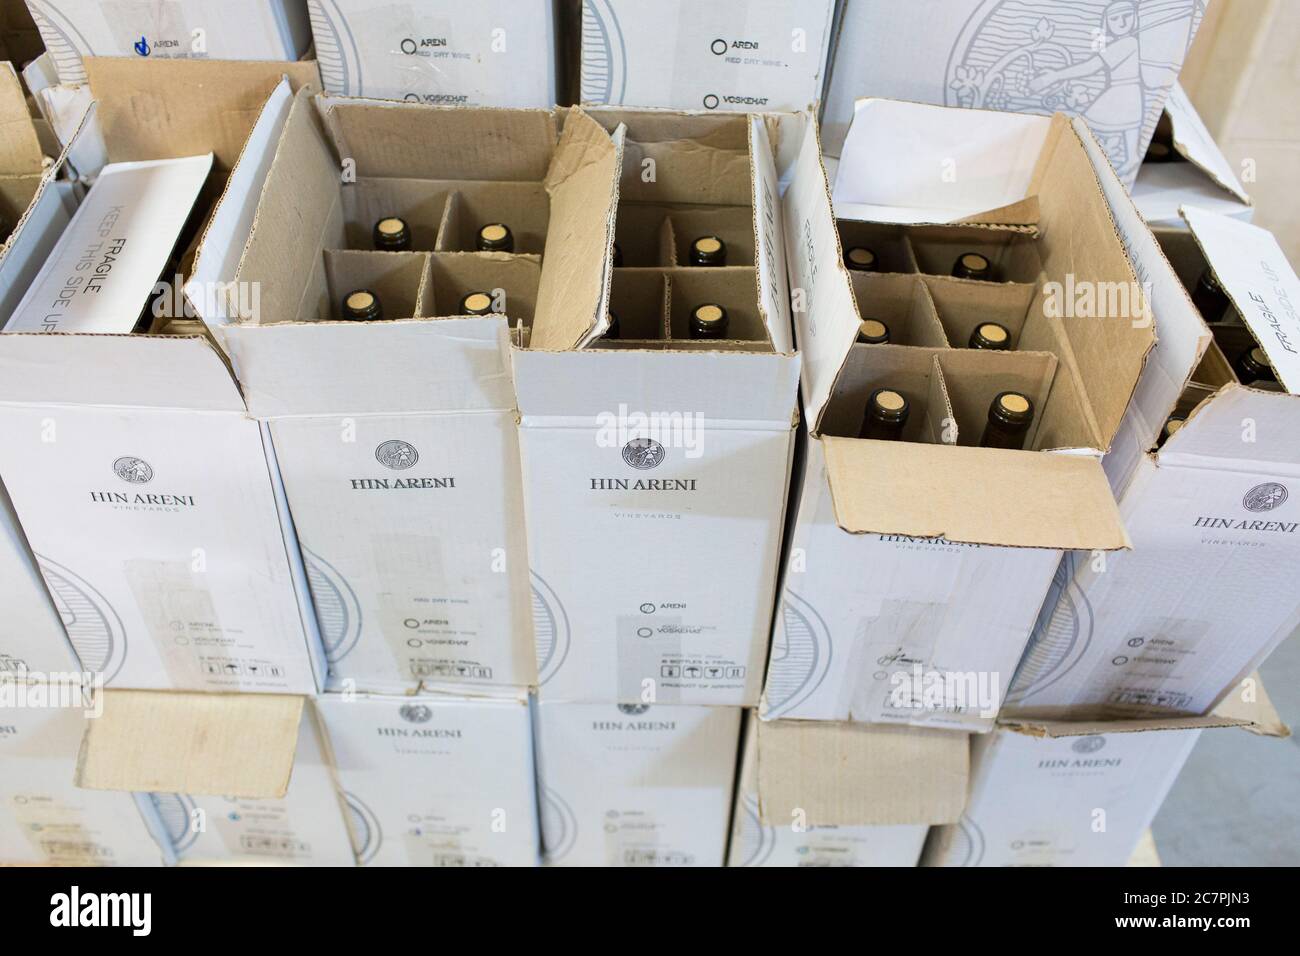 Barrels and bottles ready for export at the Hin Areni Vineyard, a few hours south of Yerevan in Armenia. Stock Photo